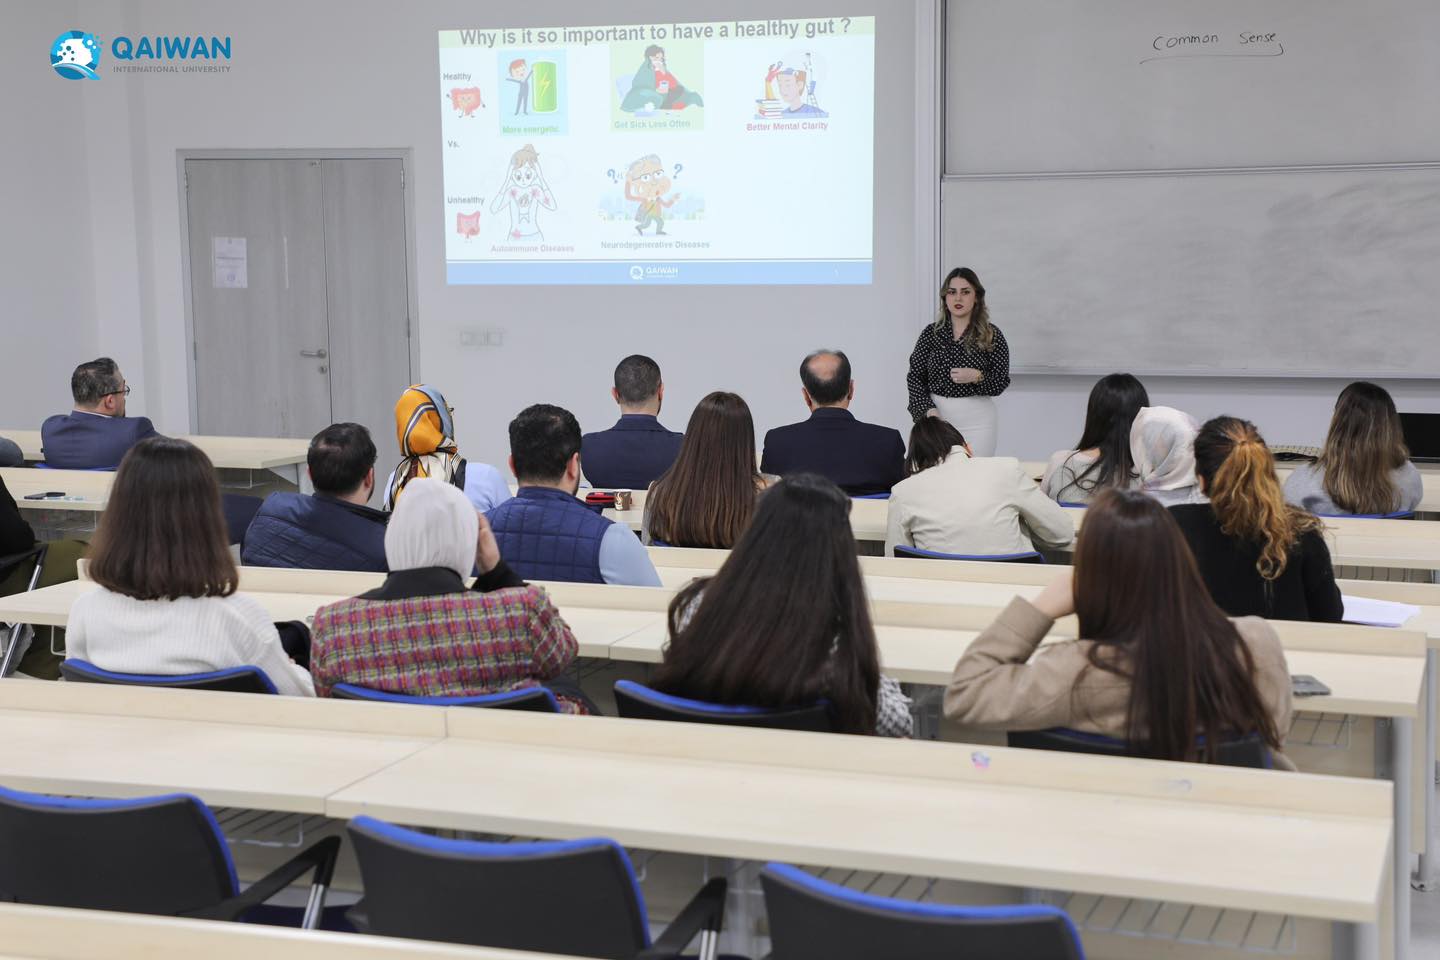 A Lecturer in the Faculty of Pharmacy delivered a seminar focusing on the beneficial microorganisms within the human body